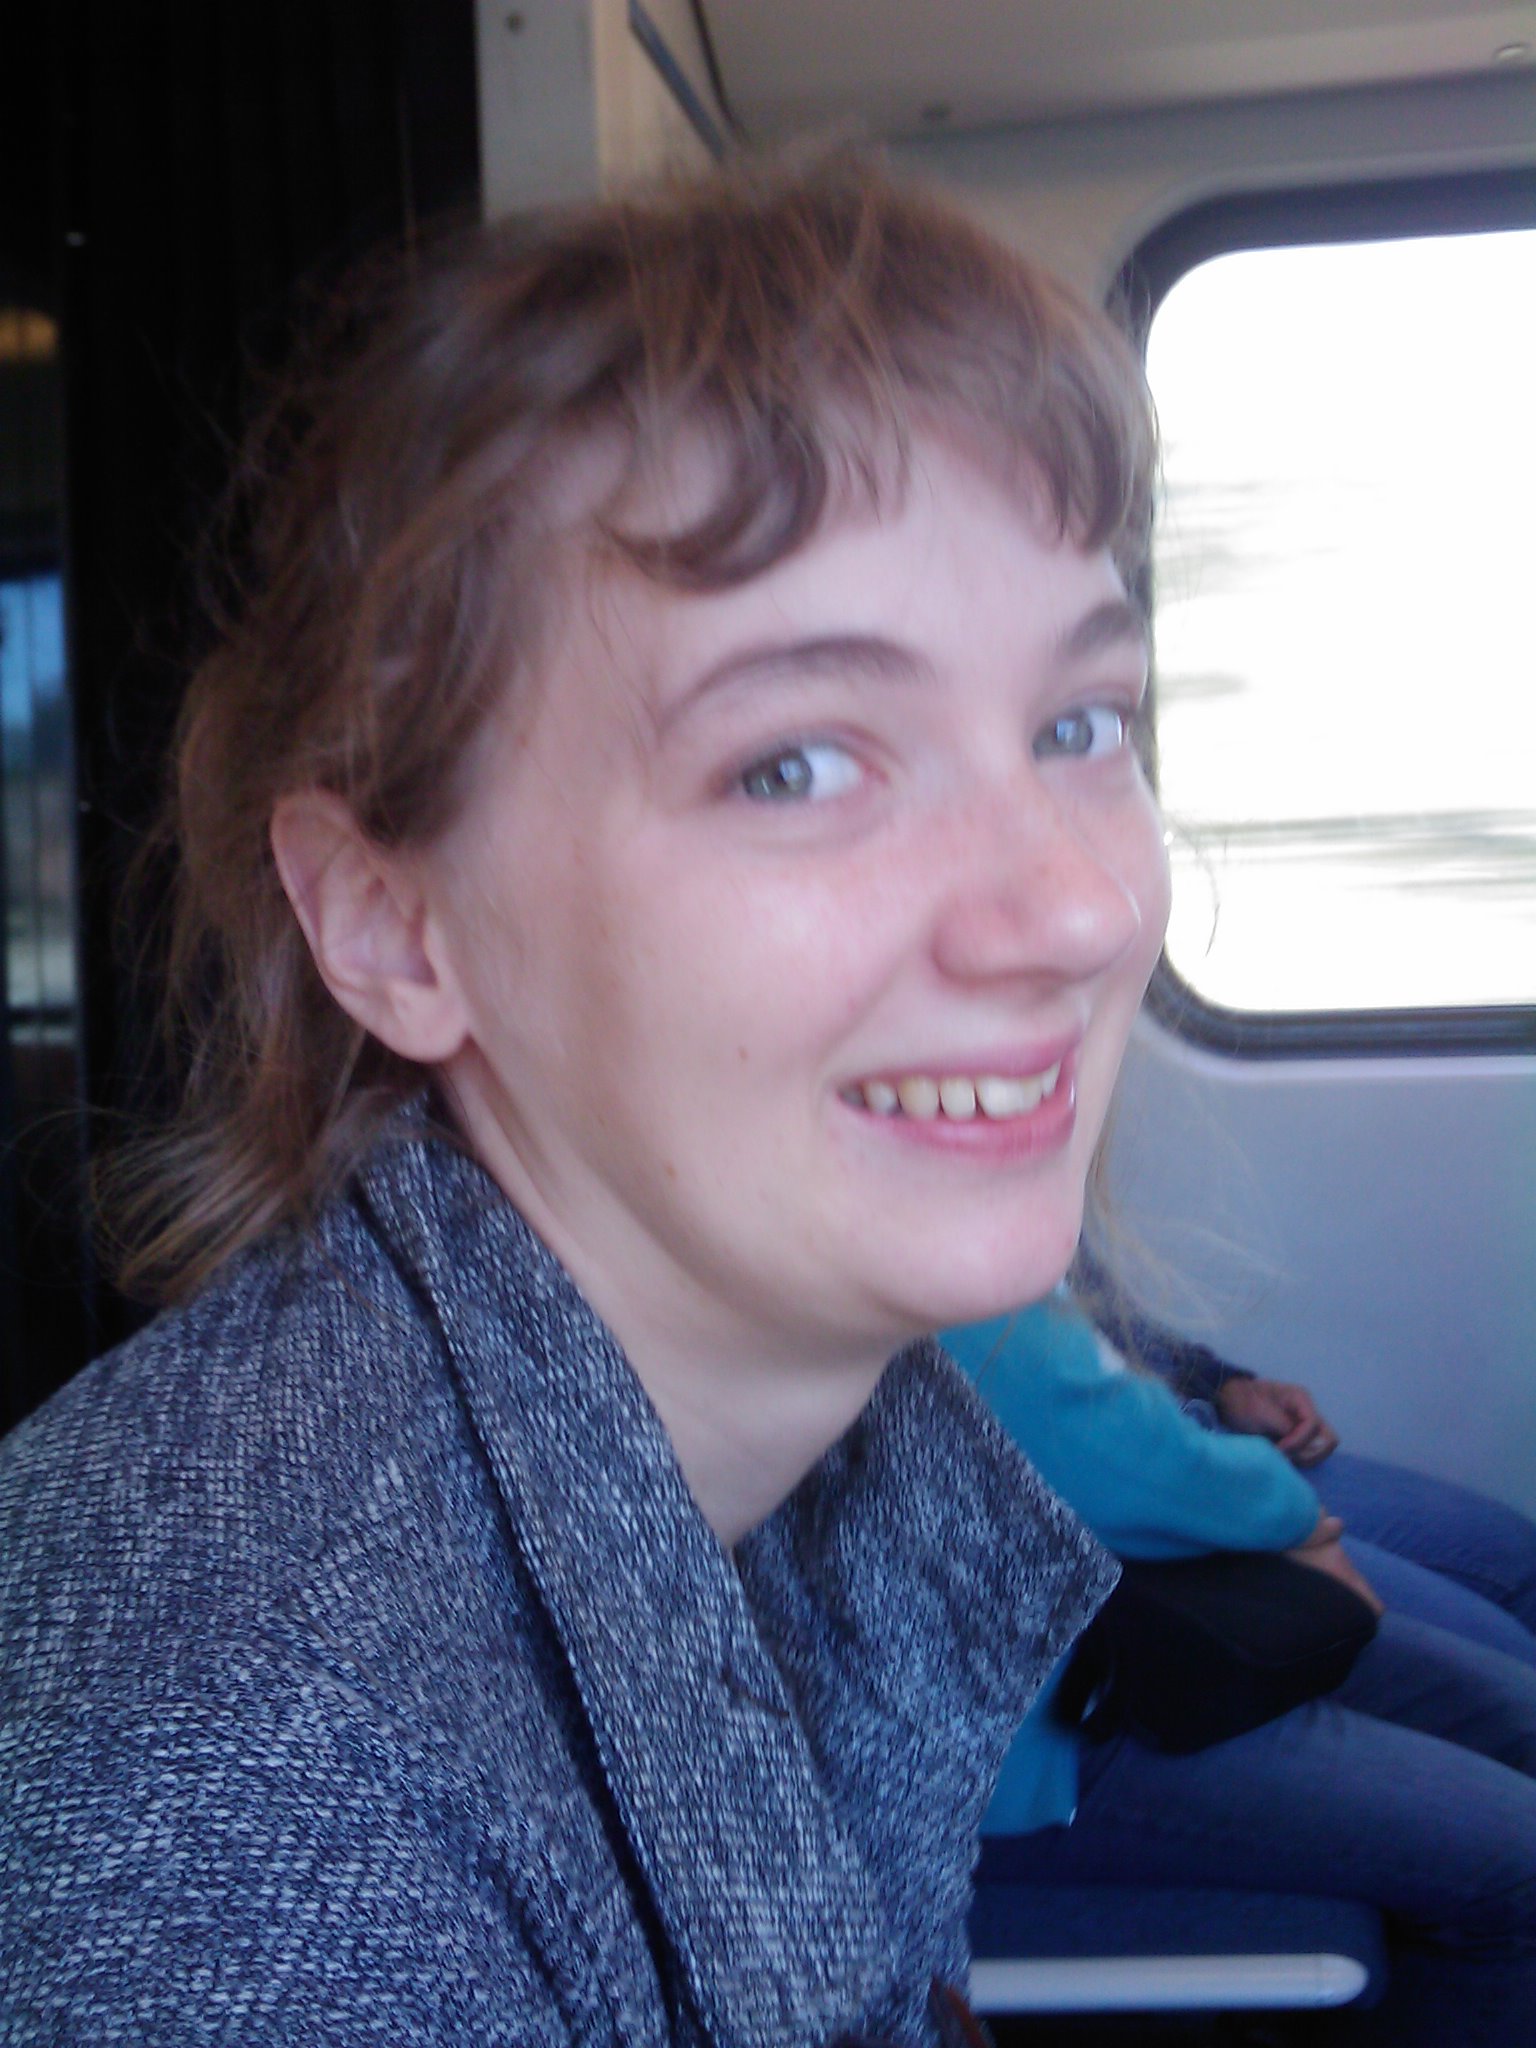 the woman is sitting on a bus while smiling